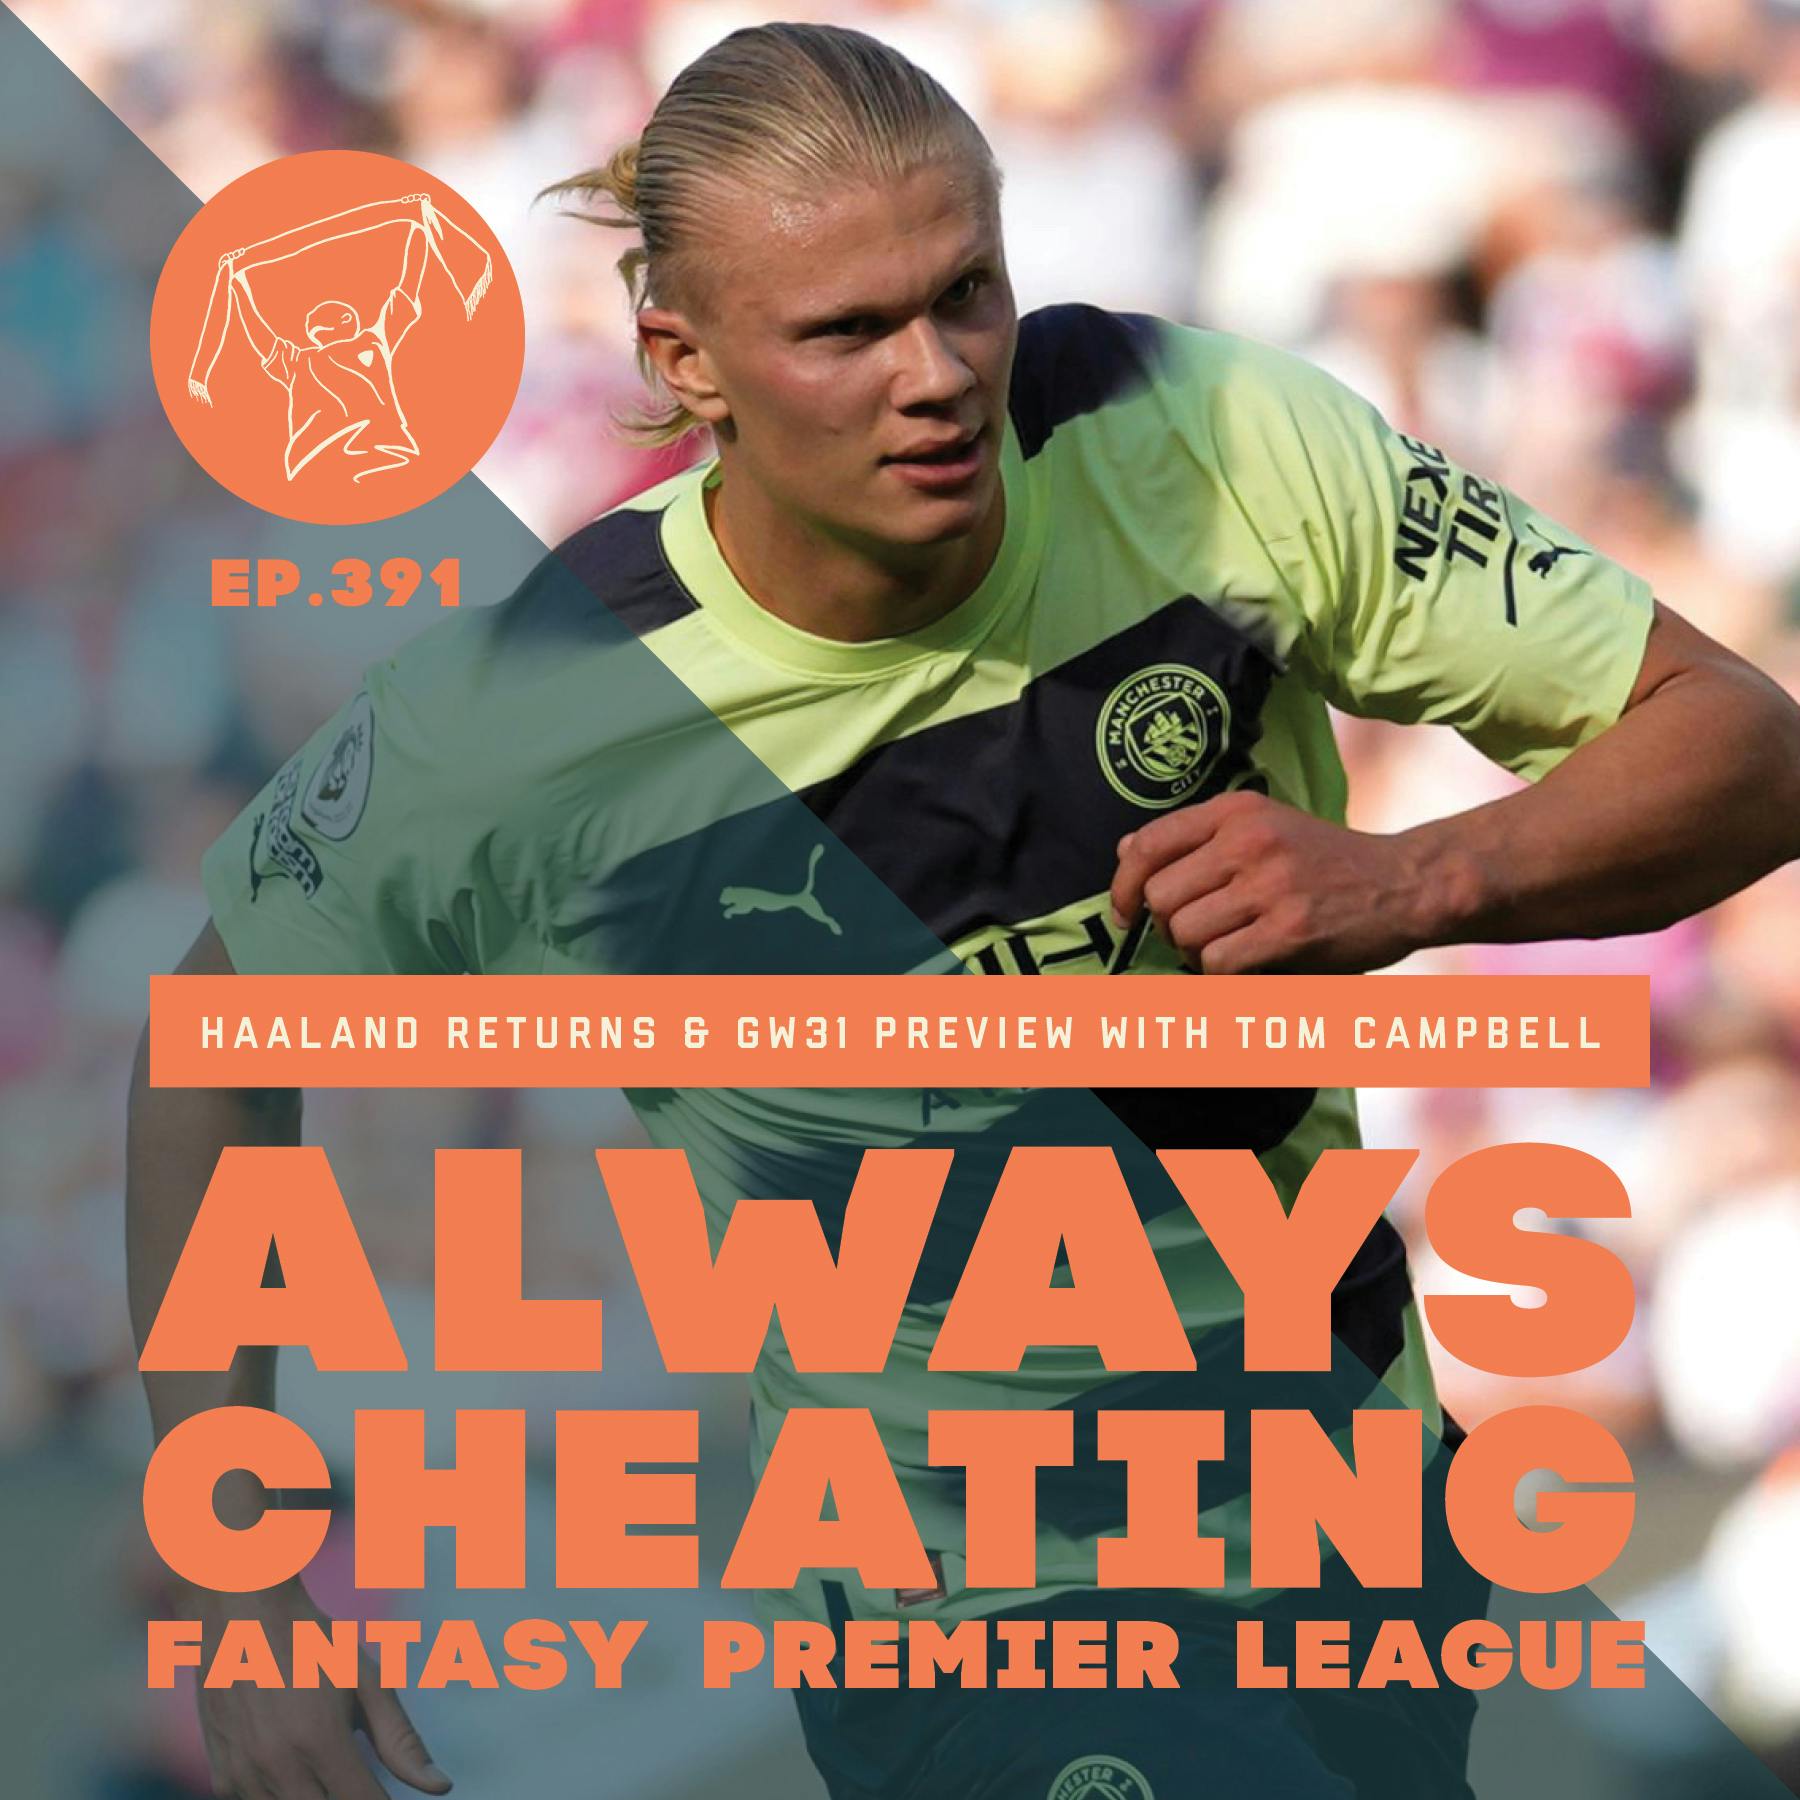 Haaland Returns & GW31 Preview with Tom Campbell